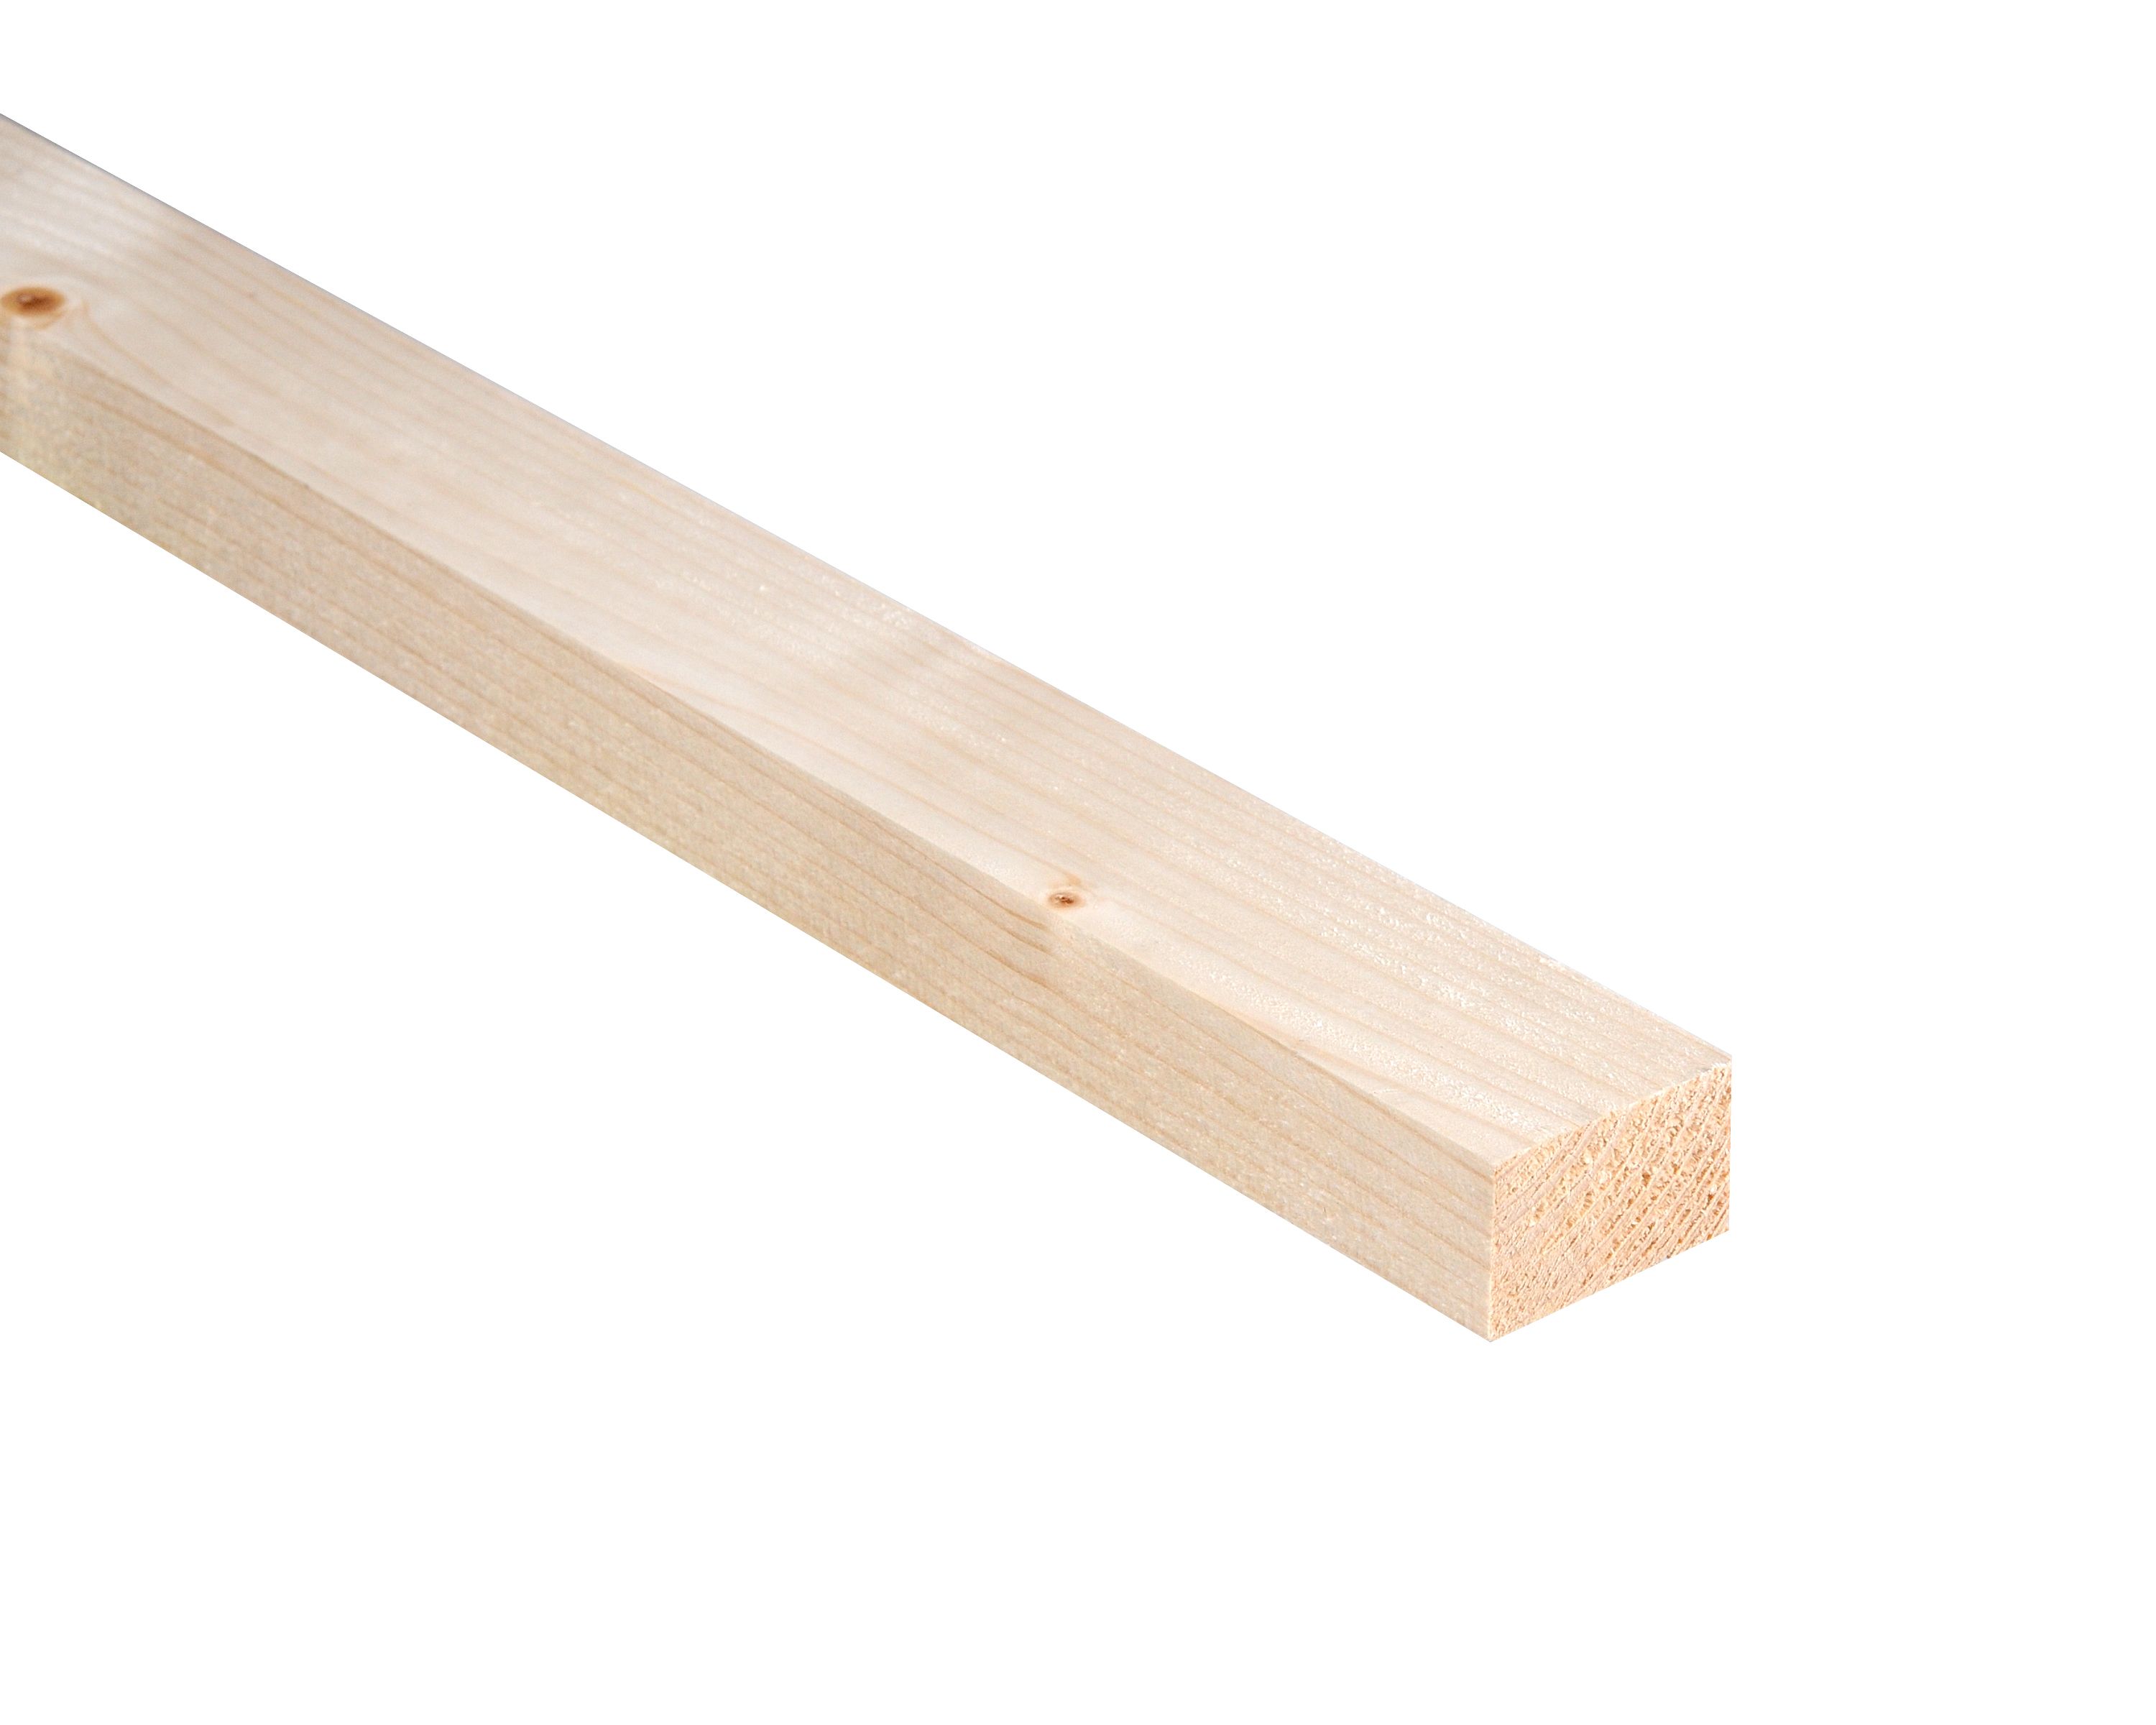 Whitewood spruce Timber (L)2.4m (W)75mm (T)47mm, Pack of 4